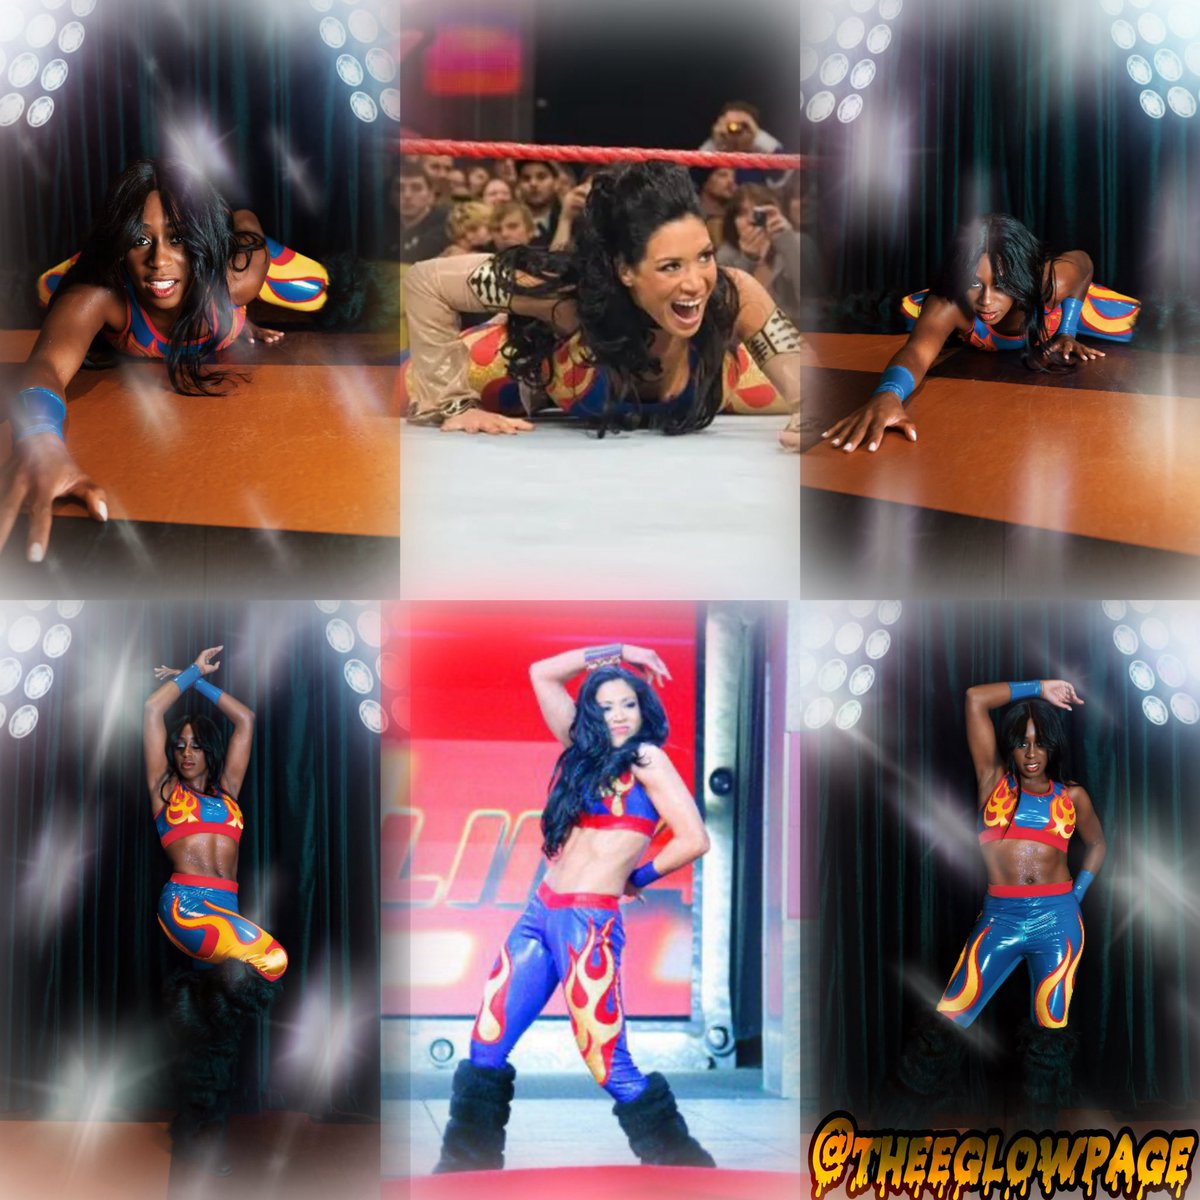 TRINITY DRESSED AS MELINA FOR HALLOWEEN!!!!! OMG THIS IS EVERYTHING AHH 😍😍😍😍 #halloween